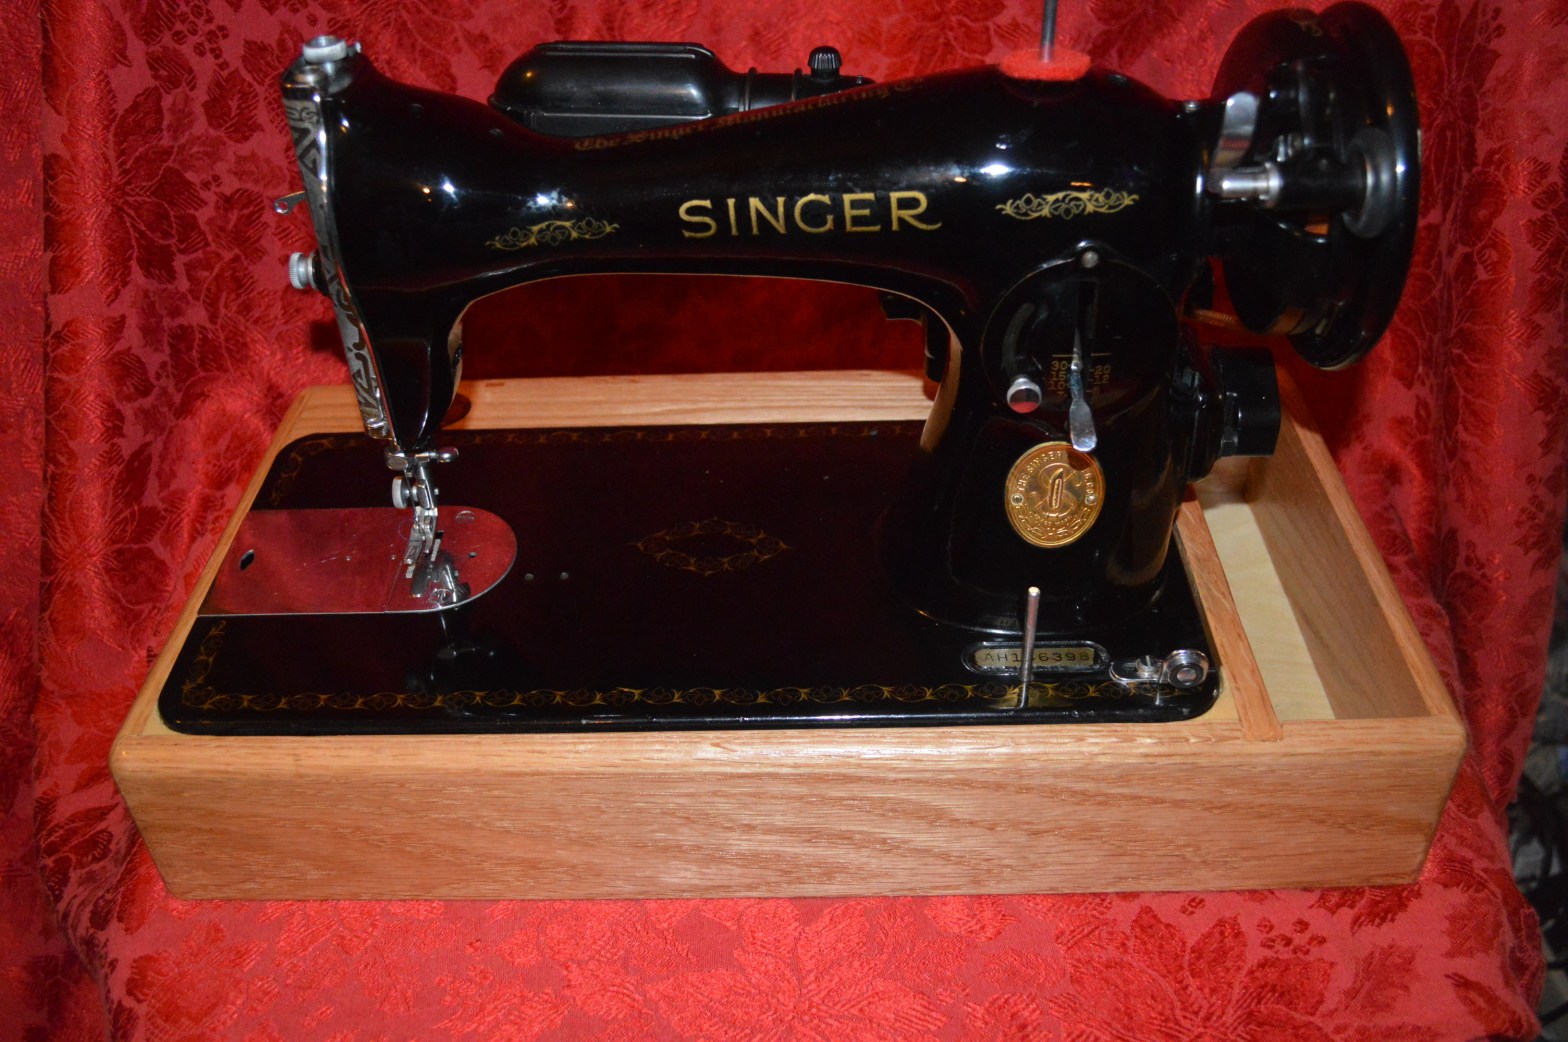 SINGER Sewing Machine Bentwood Wooden Carrying Case for 15 15-91